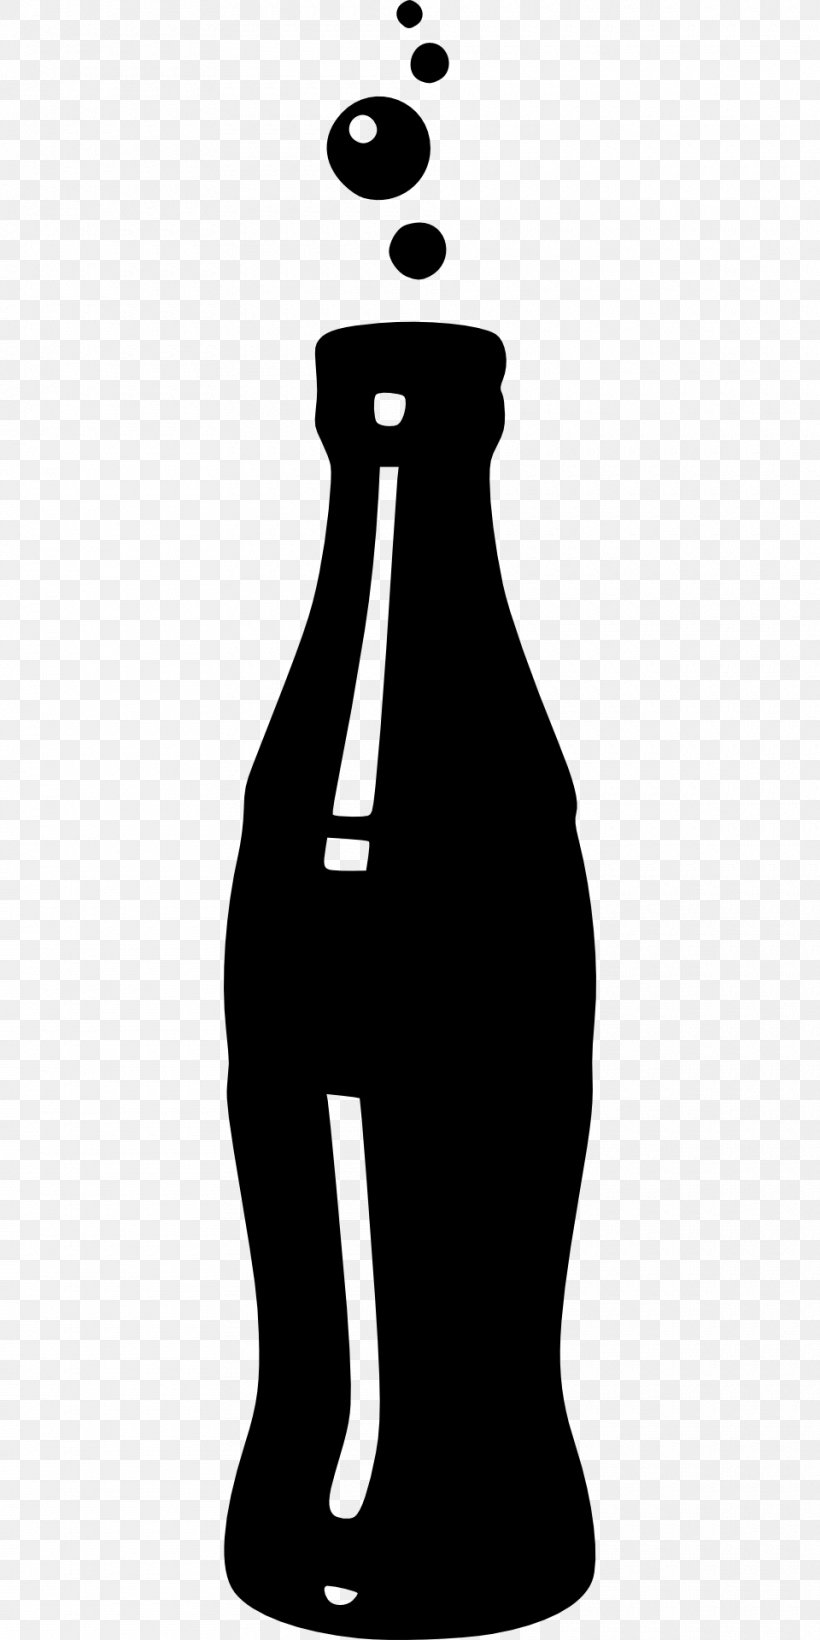 Fizzy Drinks Coca-Cola Bottle Clip Art, PNG, 960x1920px, Fizzy Drinks, Beverage Can, Black And White, Bottle, Bouteille De Cocacola Download Free